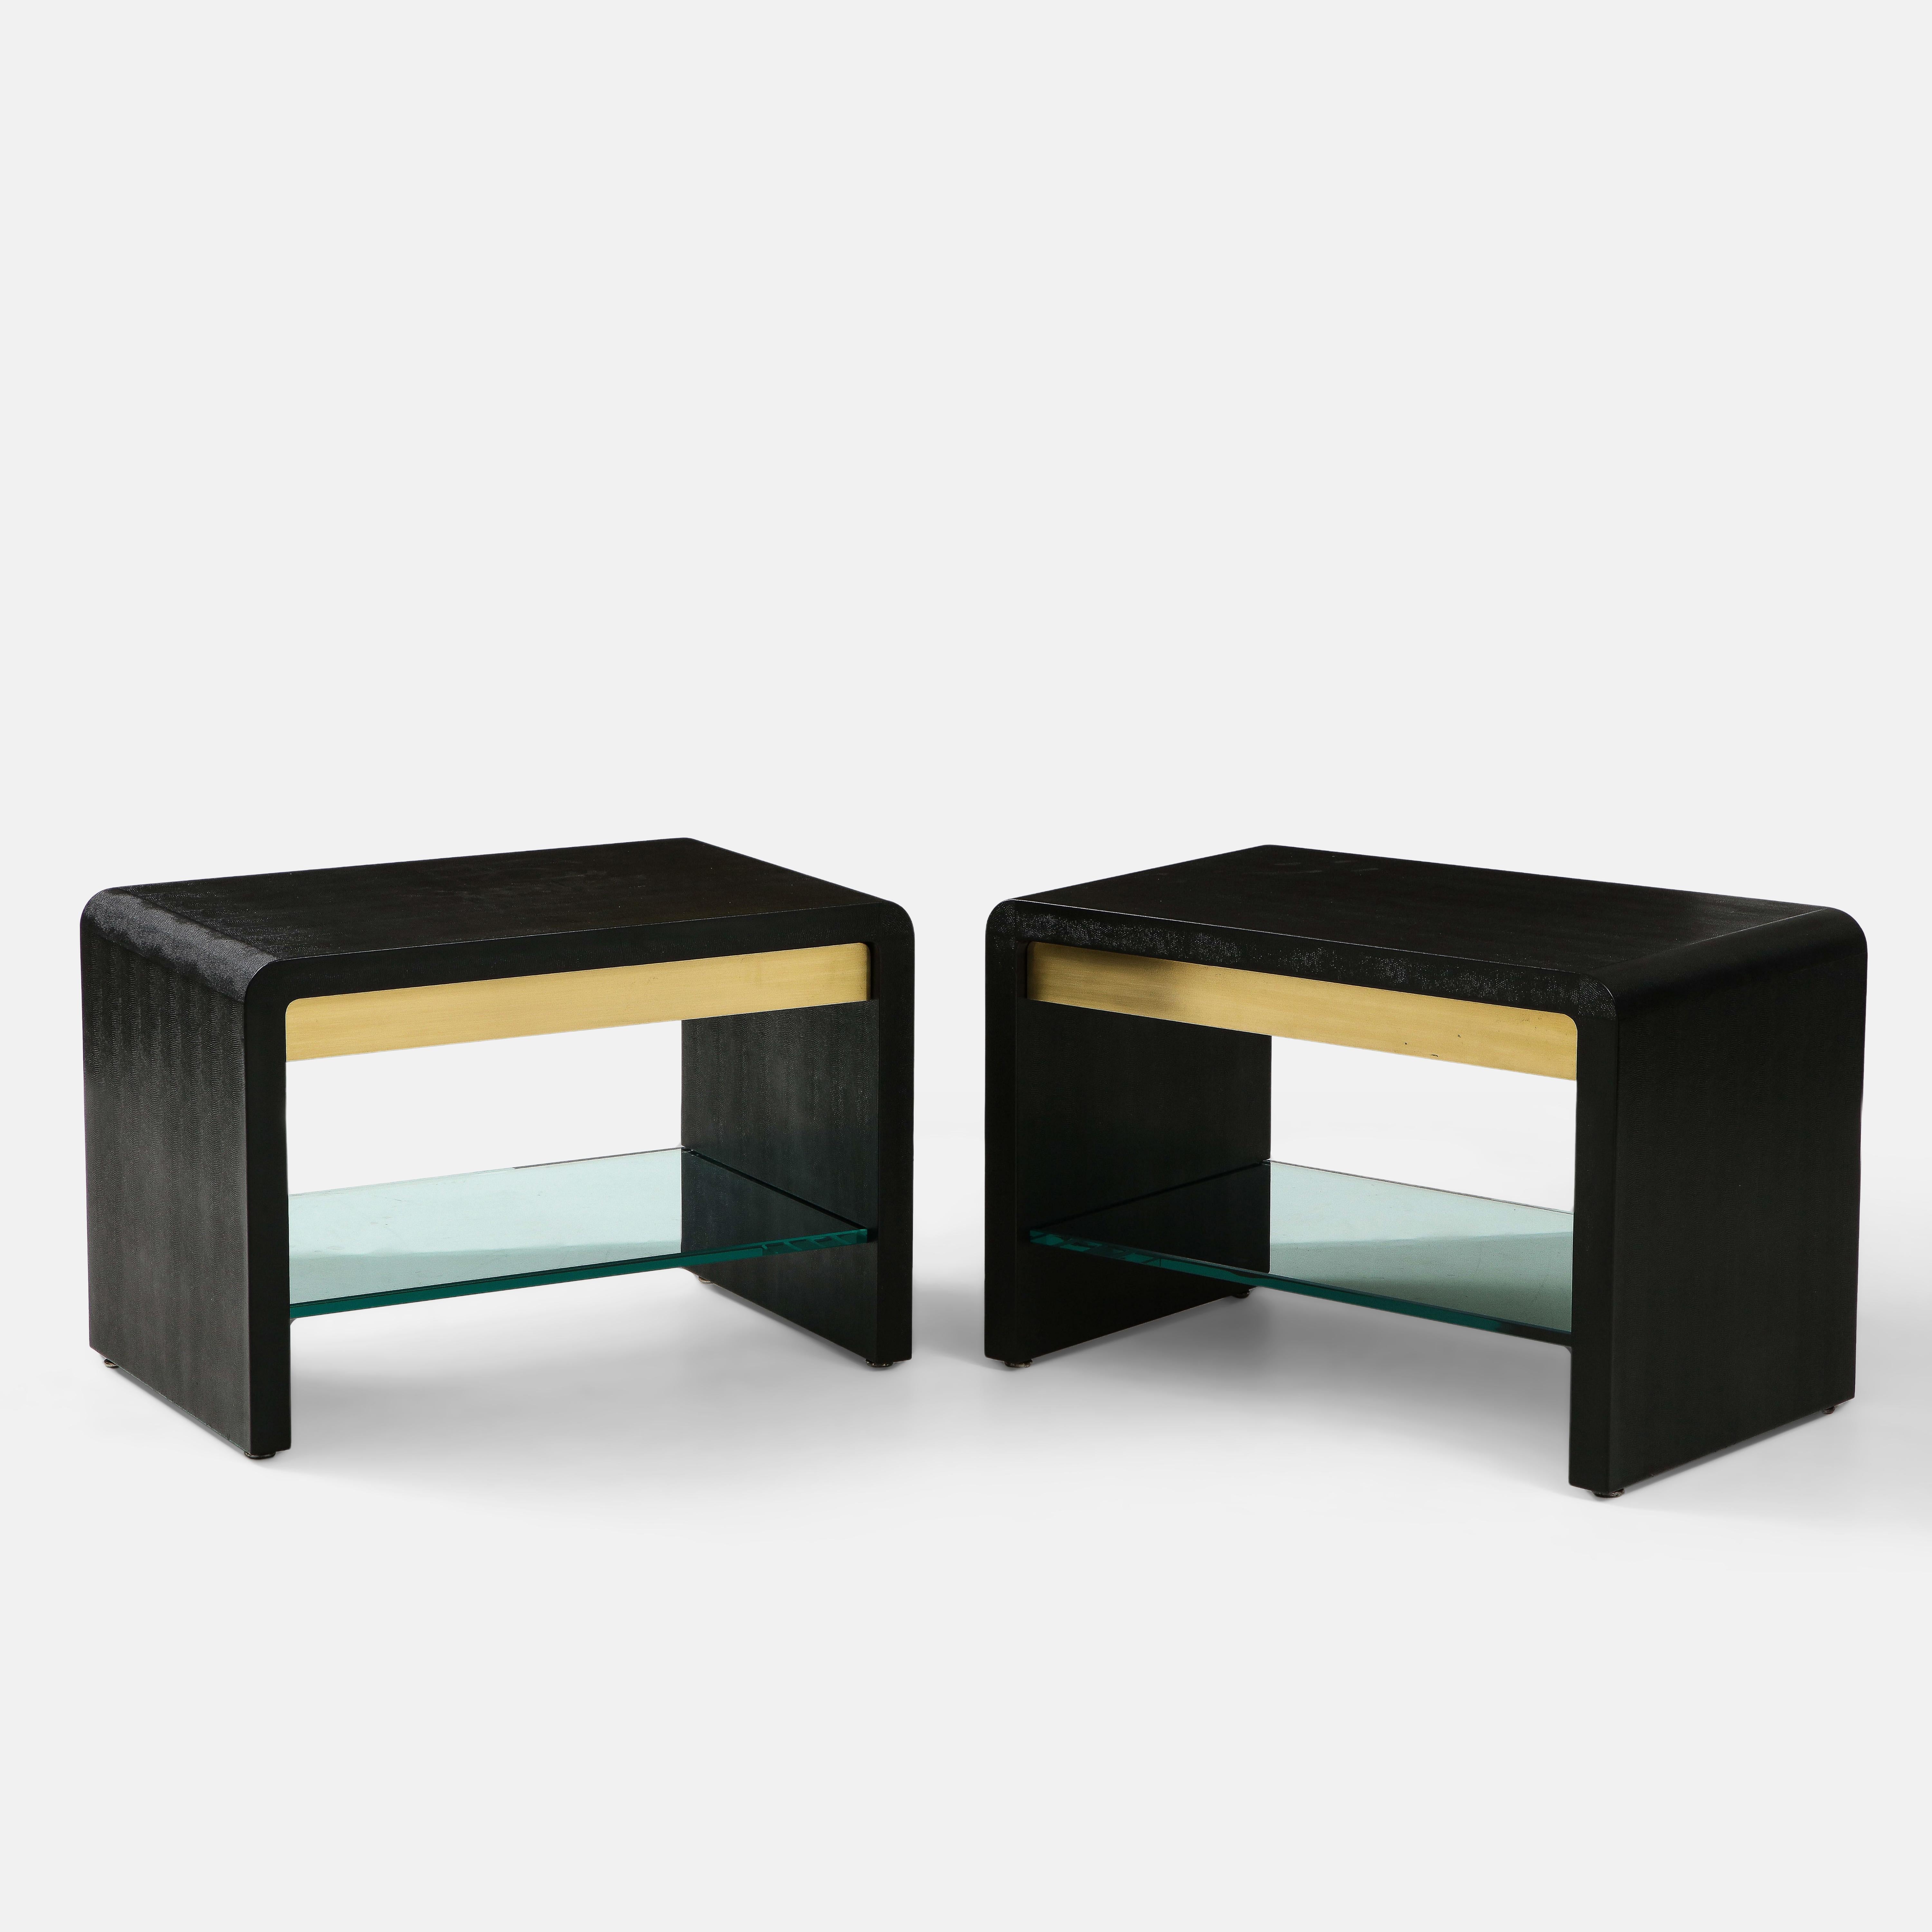 Karl Springer rare pair of large waterfall side or end tables covered in black lizard embossed leather with brass drawers and original thick glass shelves below. These exquisite pair of side tables are the larger scaled model of this side table and